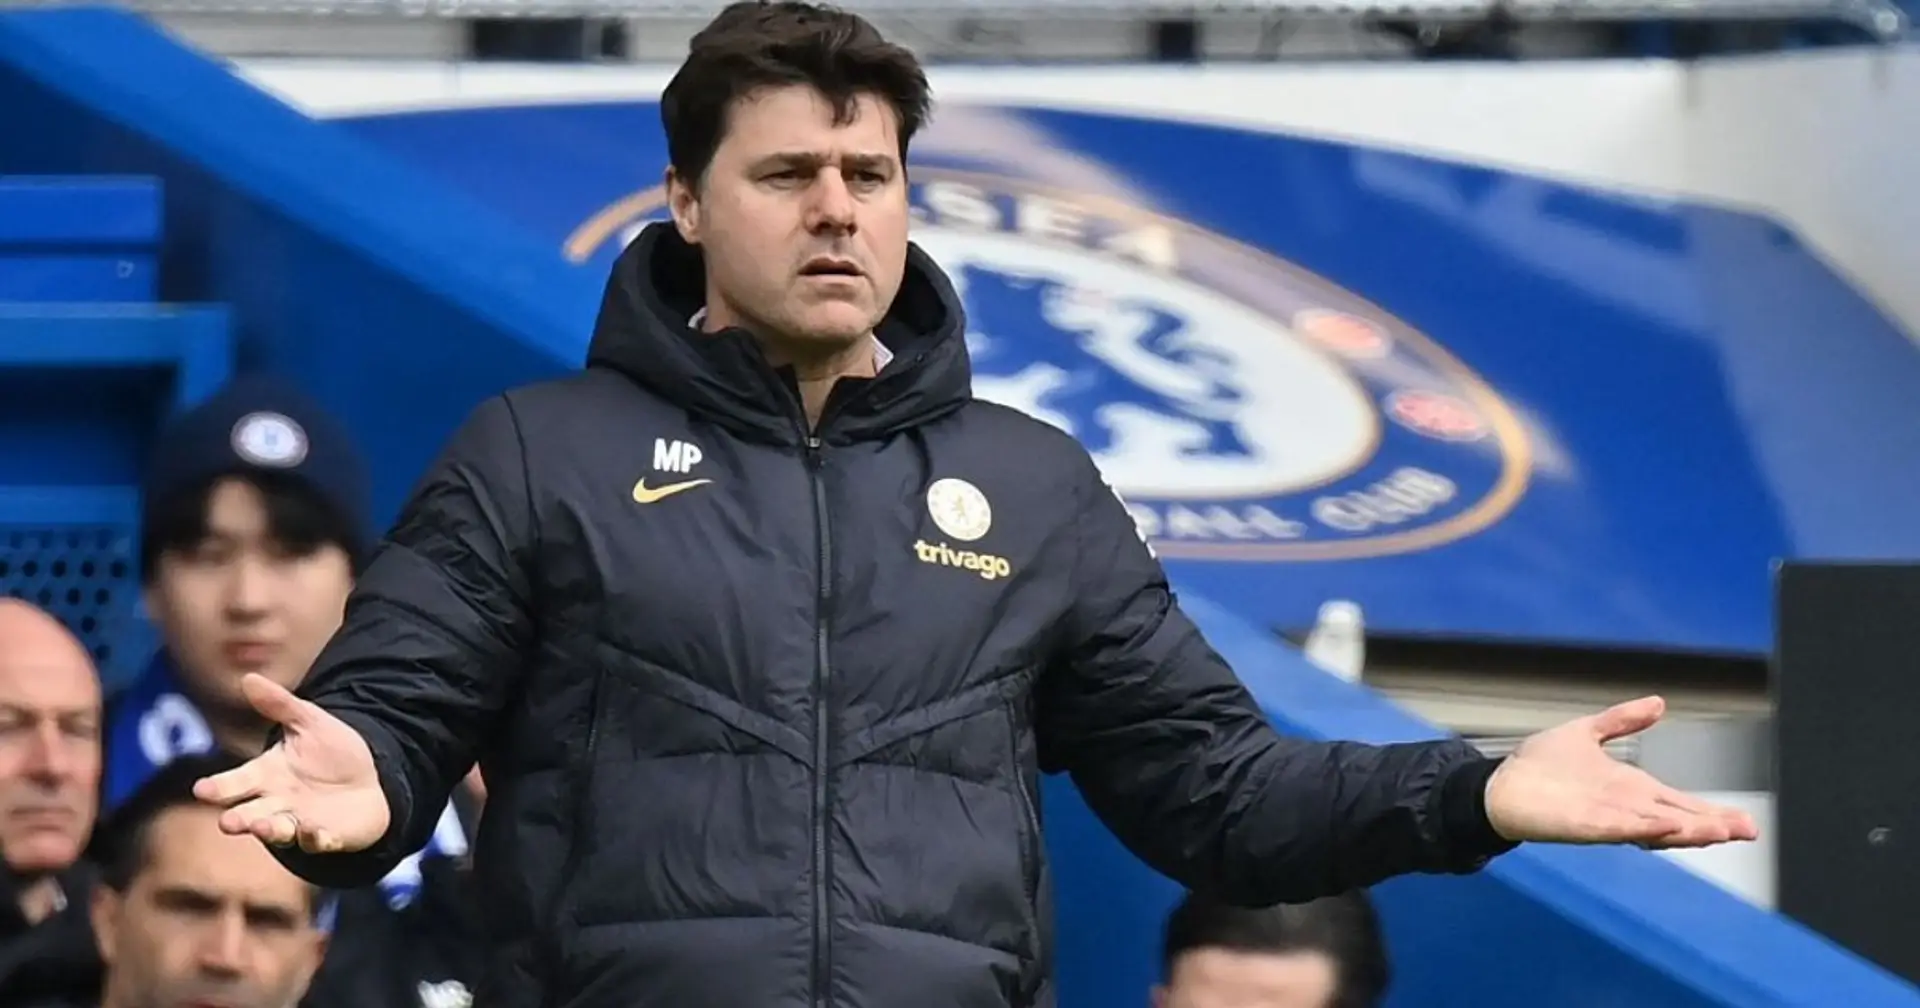 Timeline for decision on Pochettino's future revealed and 2 more big stories you may have missed